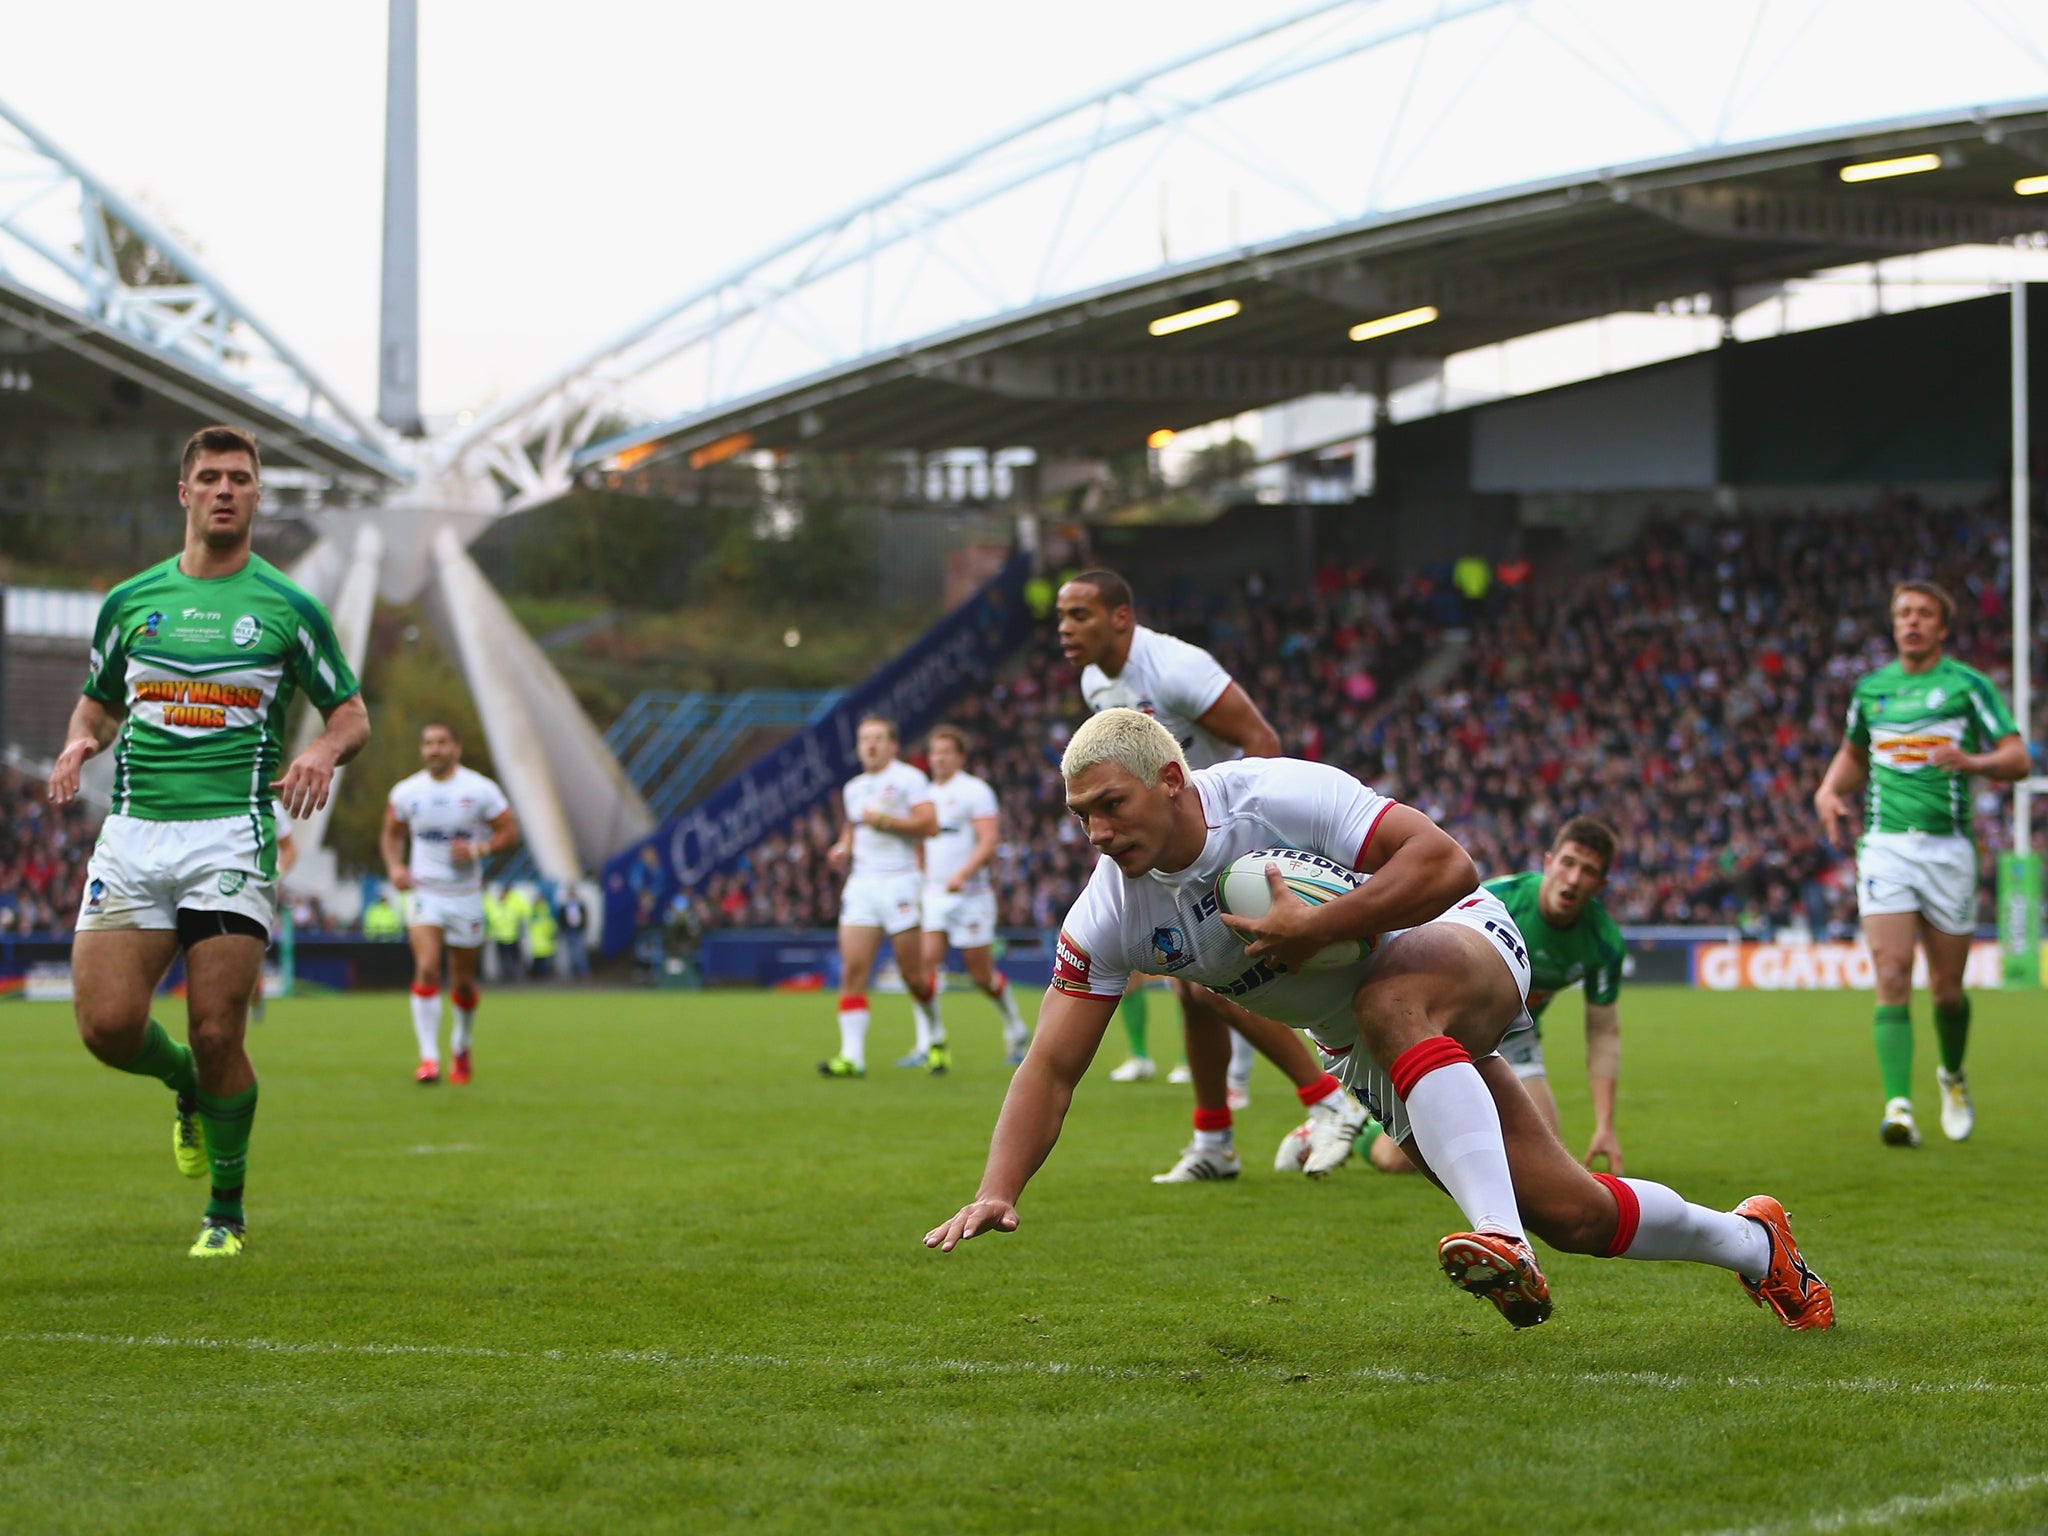 Ryan Hall scored a hat-trick for England in their 42-0 win over Ireland